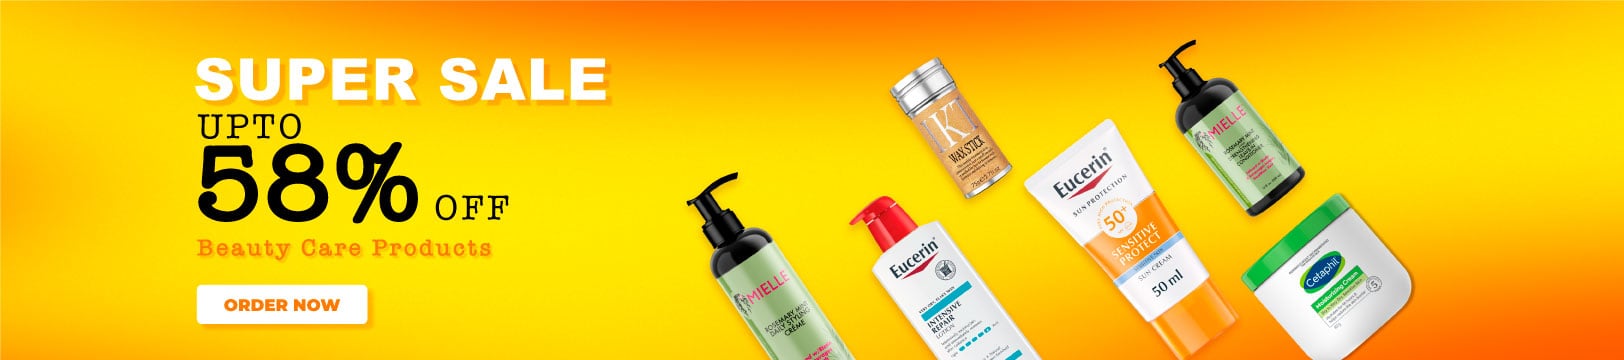 Beauty Care products